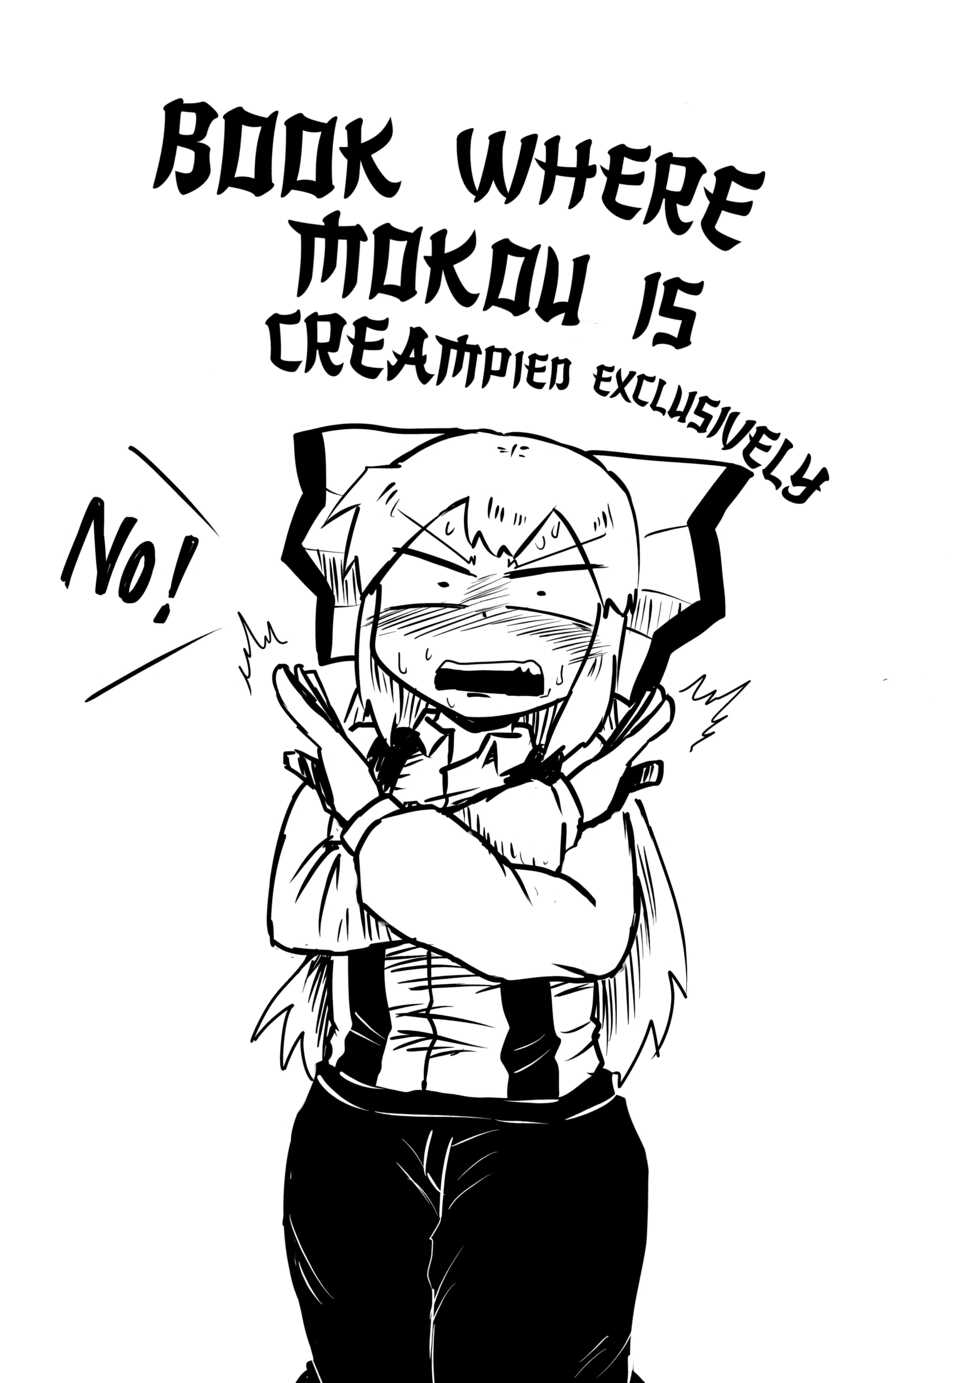 [Nice Tack] Book Where Mokou Is Creampied Exclusively (Touhou Project) - Page 1